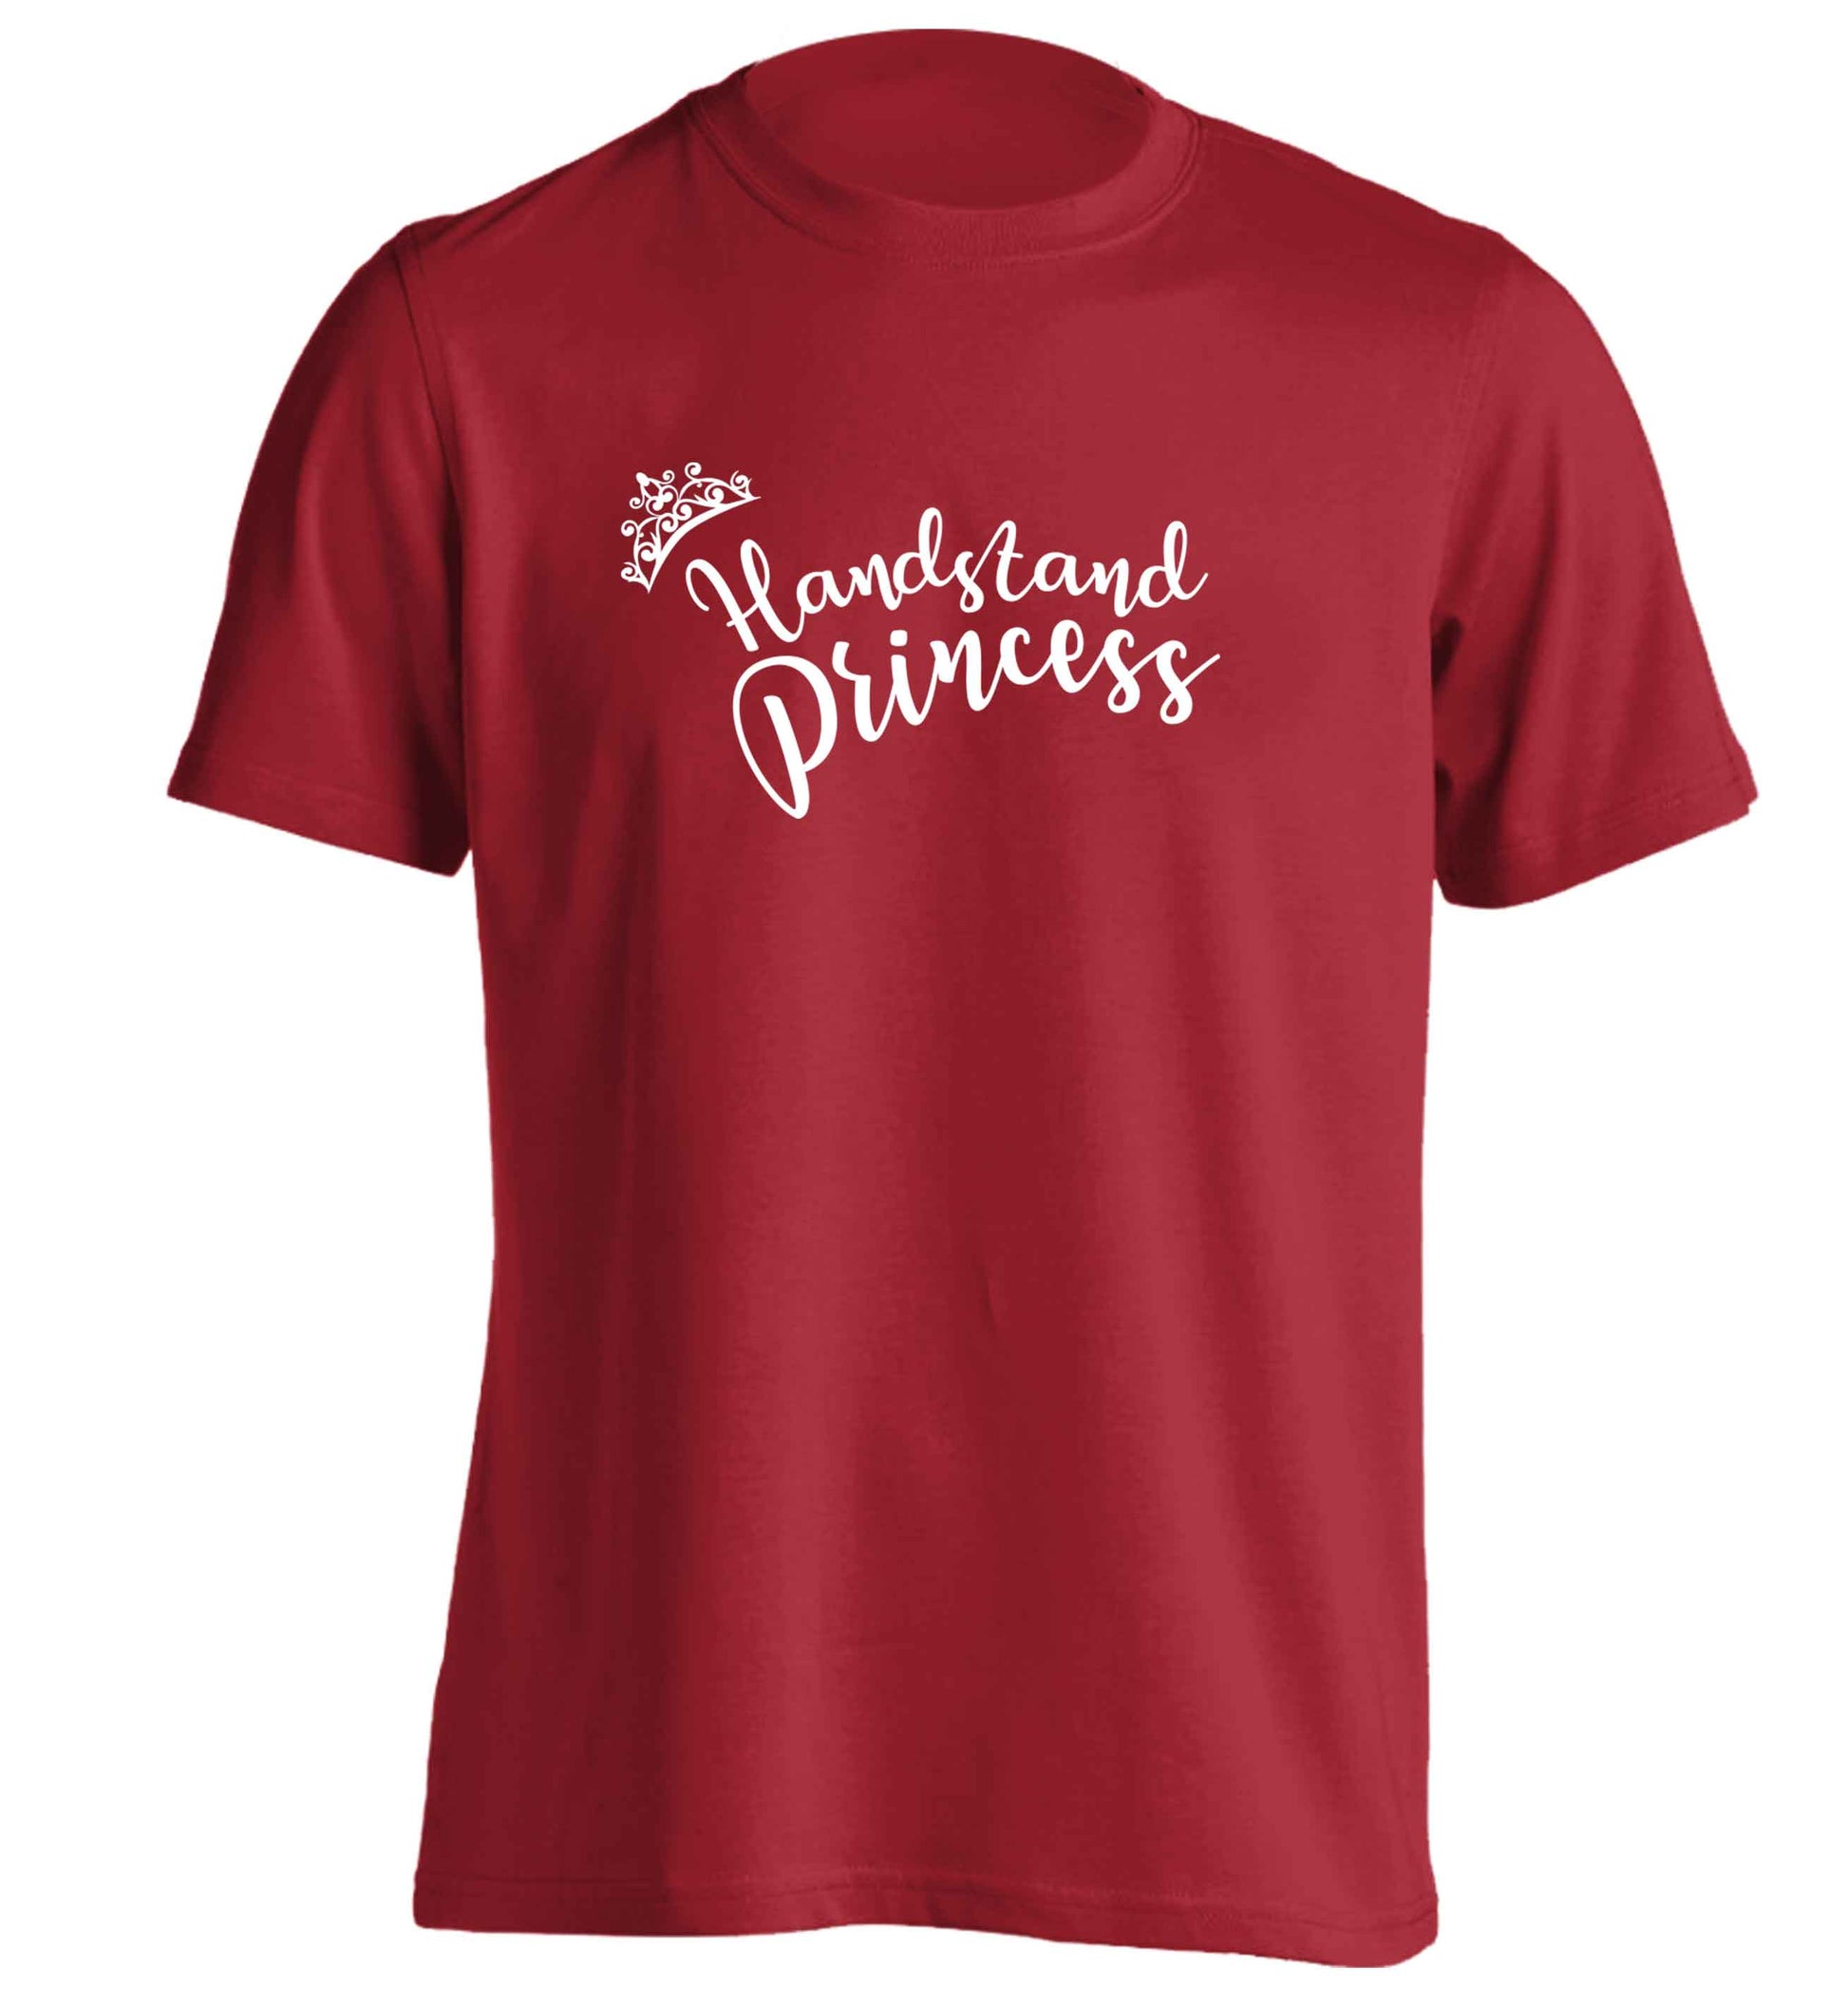 Handstand princess adults unisex red Tshirt 2XL